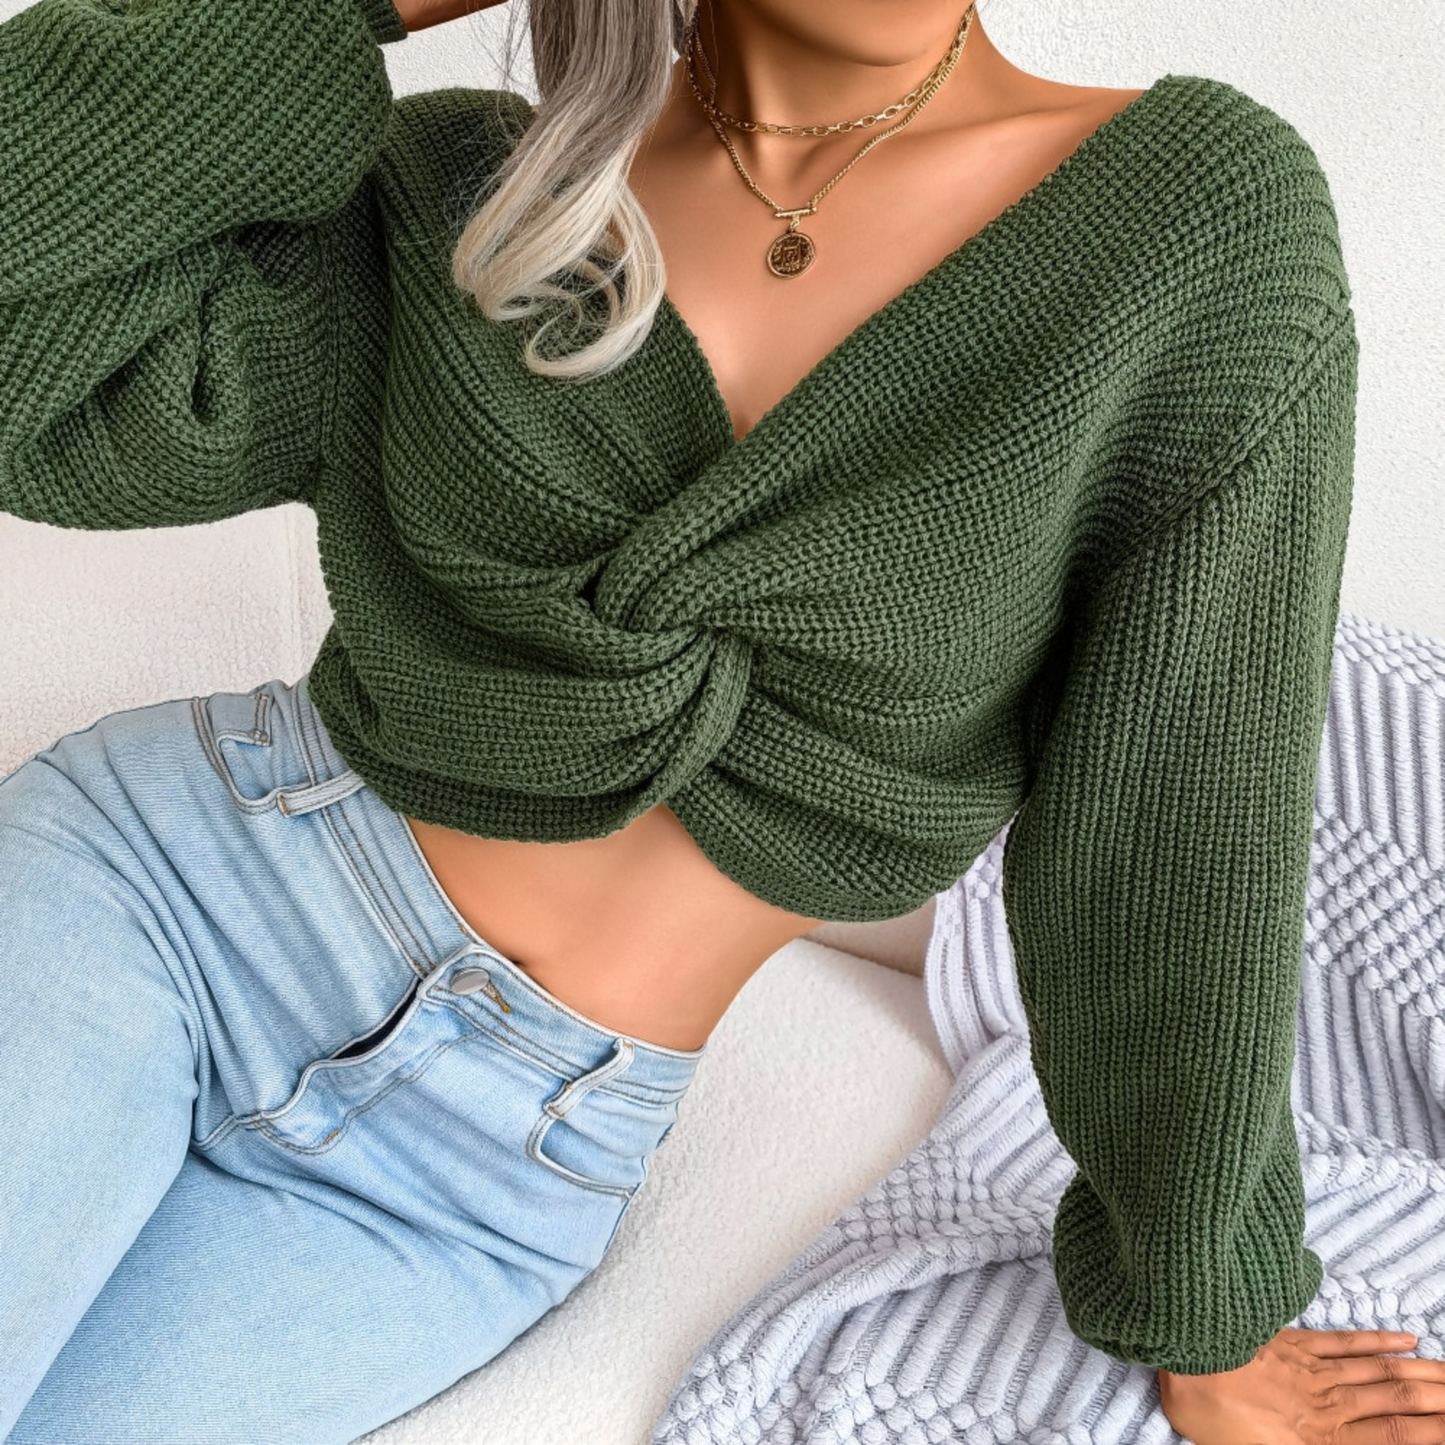 Kiera - Green Twisted Ribbed Crop Top - Model Mannequin